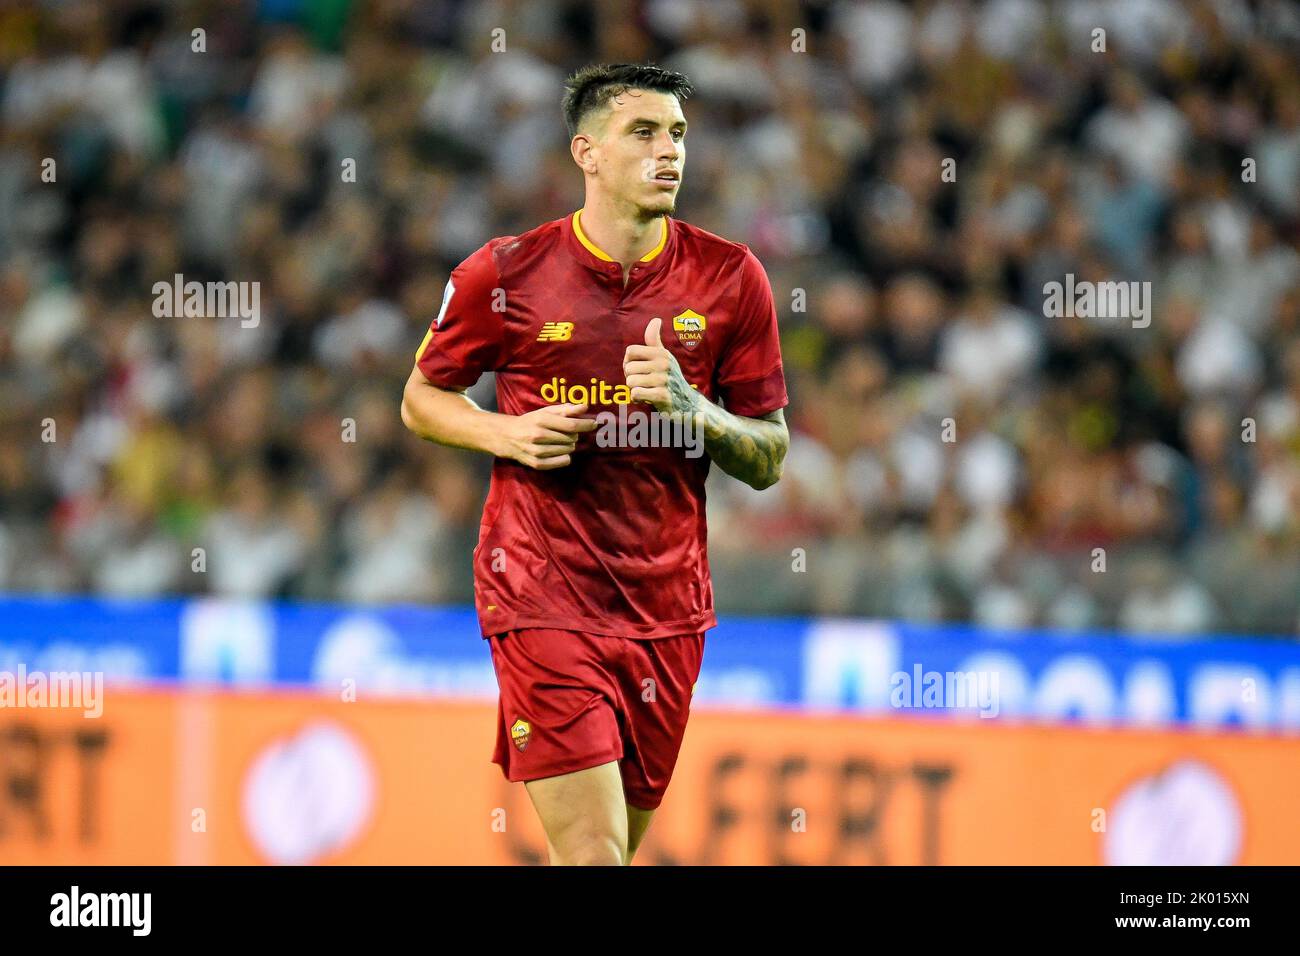 Udine, Italy. 04th Sep, 2022. Roma's Roger Ibanez da Silva portrait during Udinese Calcio vs AS Roma, italian soccer Serie A match in Udine, Italy, September 04 2022 Credit: Independent Photo Agency/Alamy Live News Stock Photo